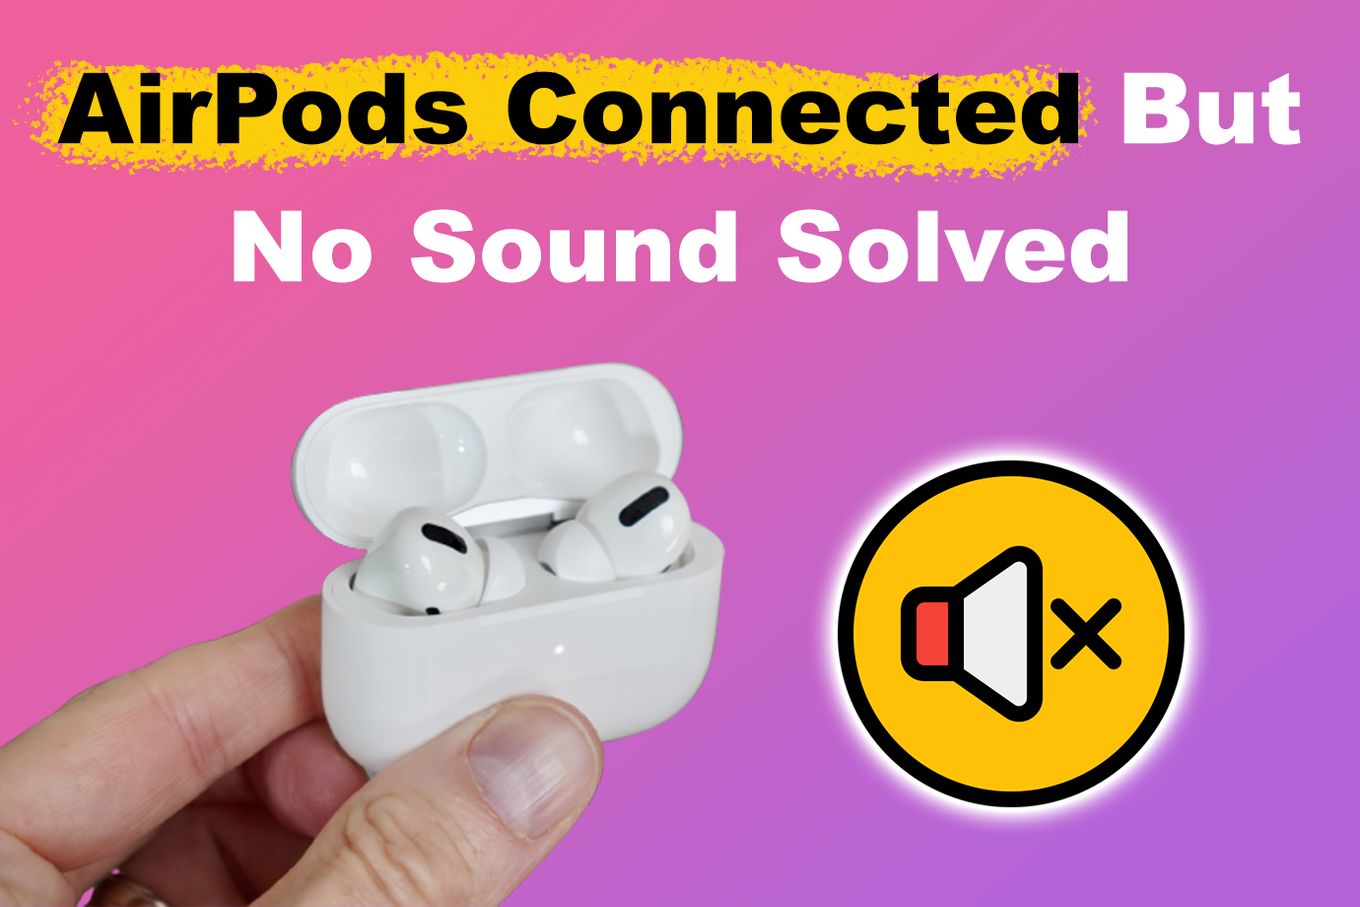 AirPods Connected But No Sound Solved